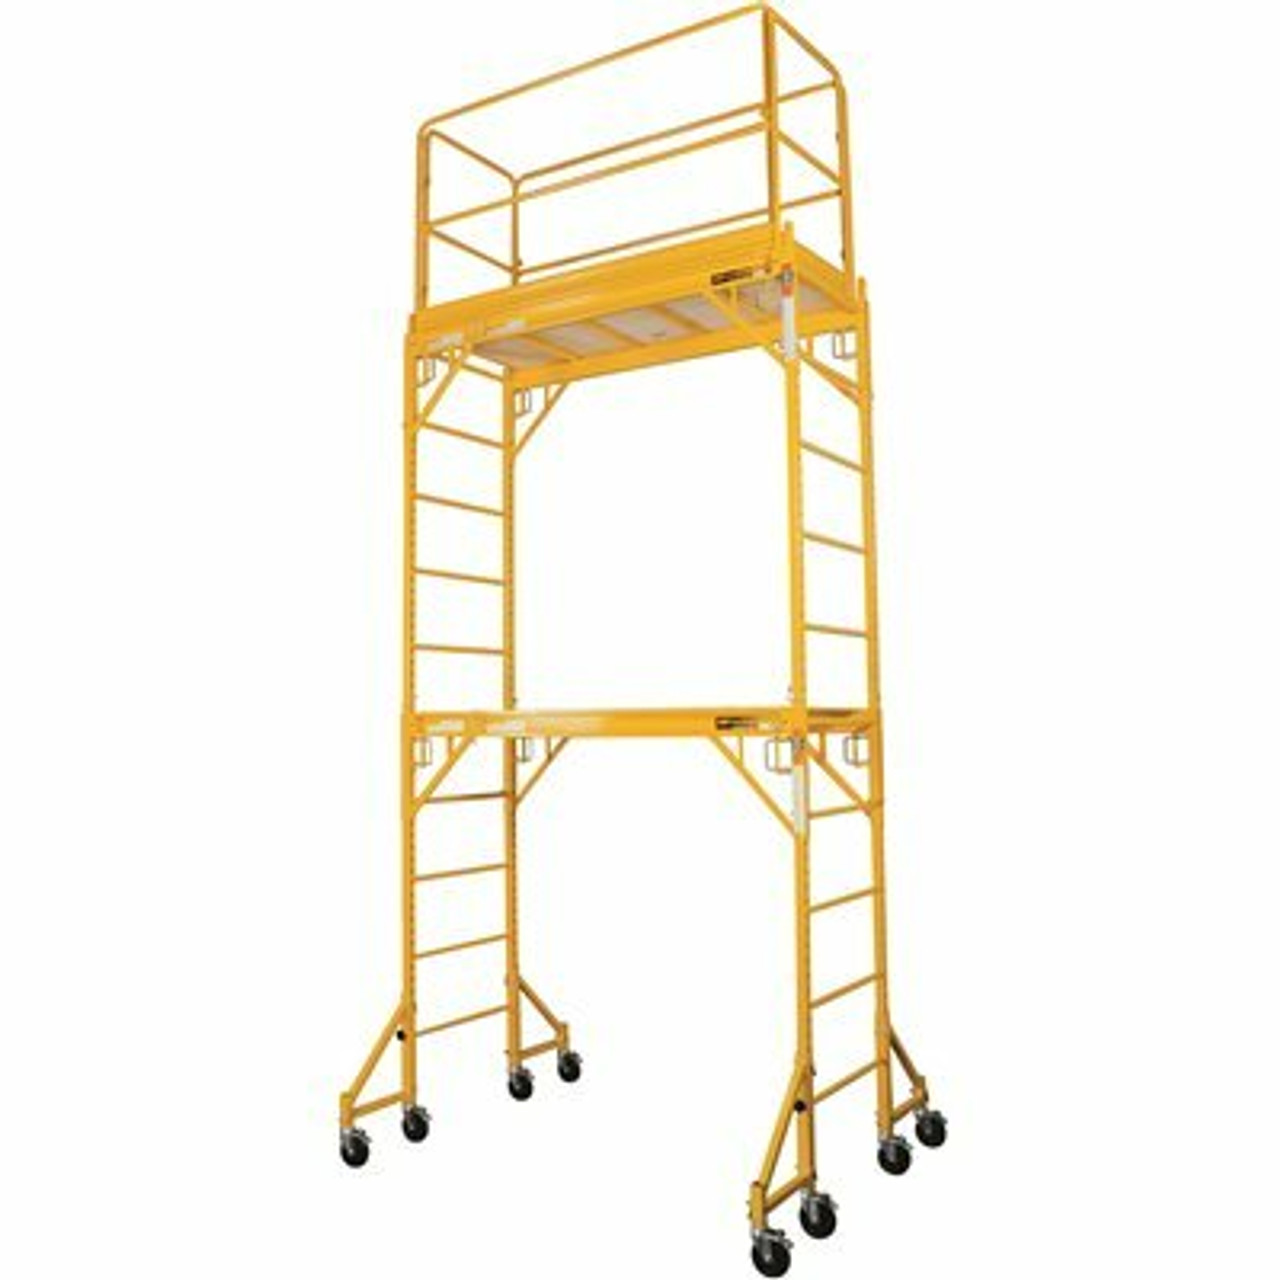 Jobsite 15.25 Ft. H X 6.2 Ft. W X 4.9 Ft. D 2-Story Steel Baker Style Rolling Scaffold Tower, 1000 Lbs. Load Capacity